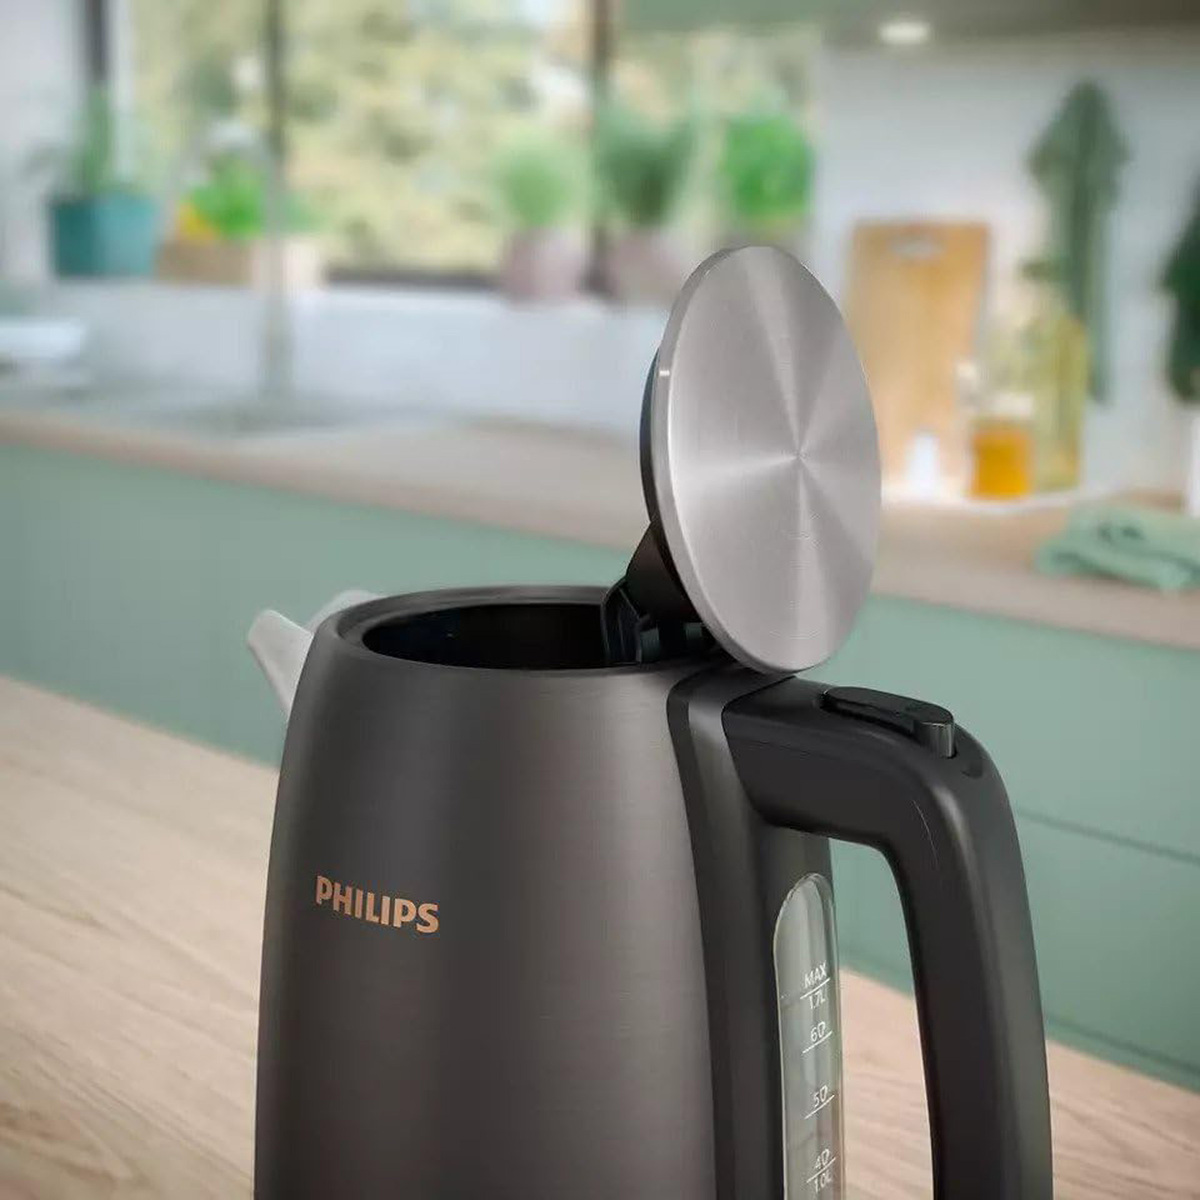 Philips 5000 Series Stainless Steel Kettle, Black & Copper, HD9352/31